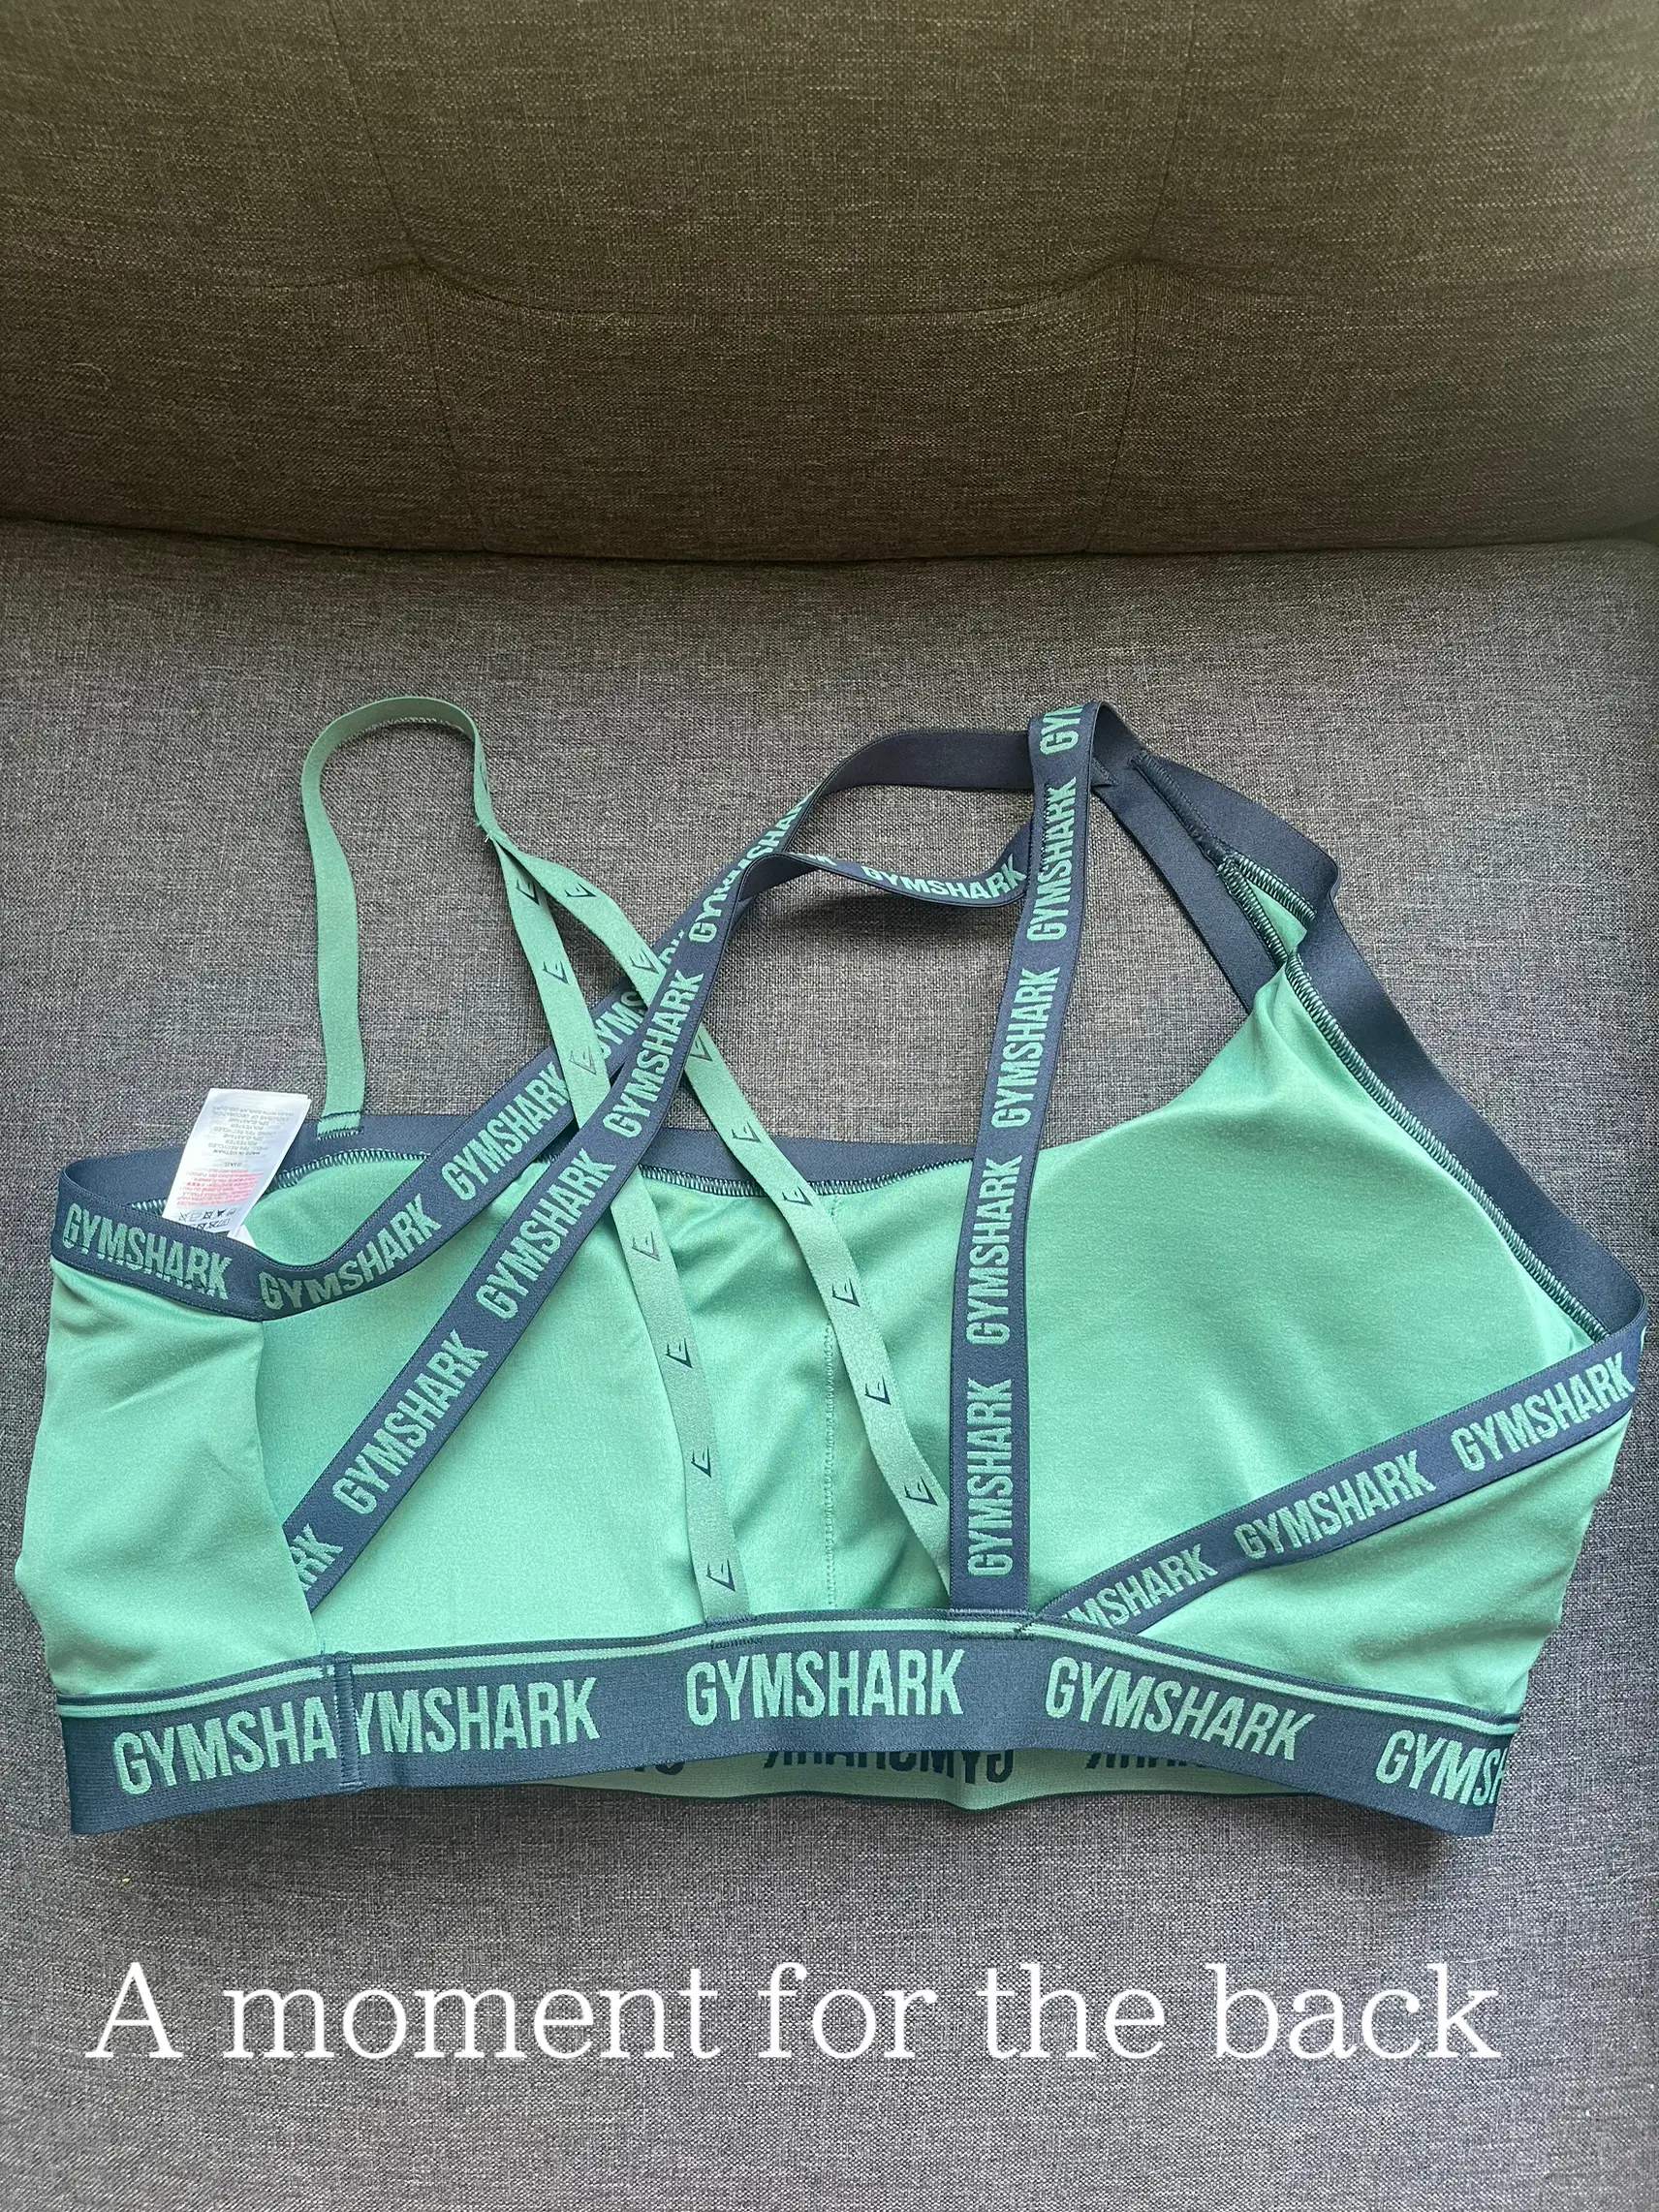 GYMSHARK haul 🤸🏽‍♀️, Gallery posted by Here4fun 🫶🏽